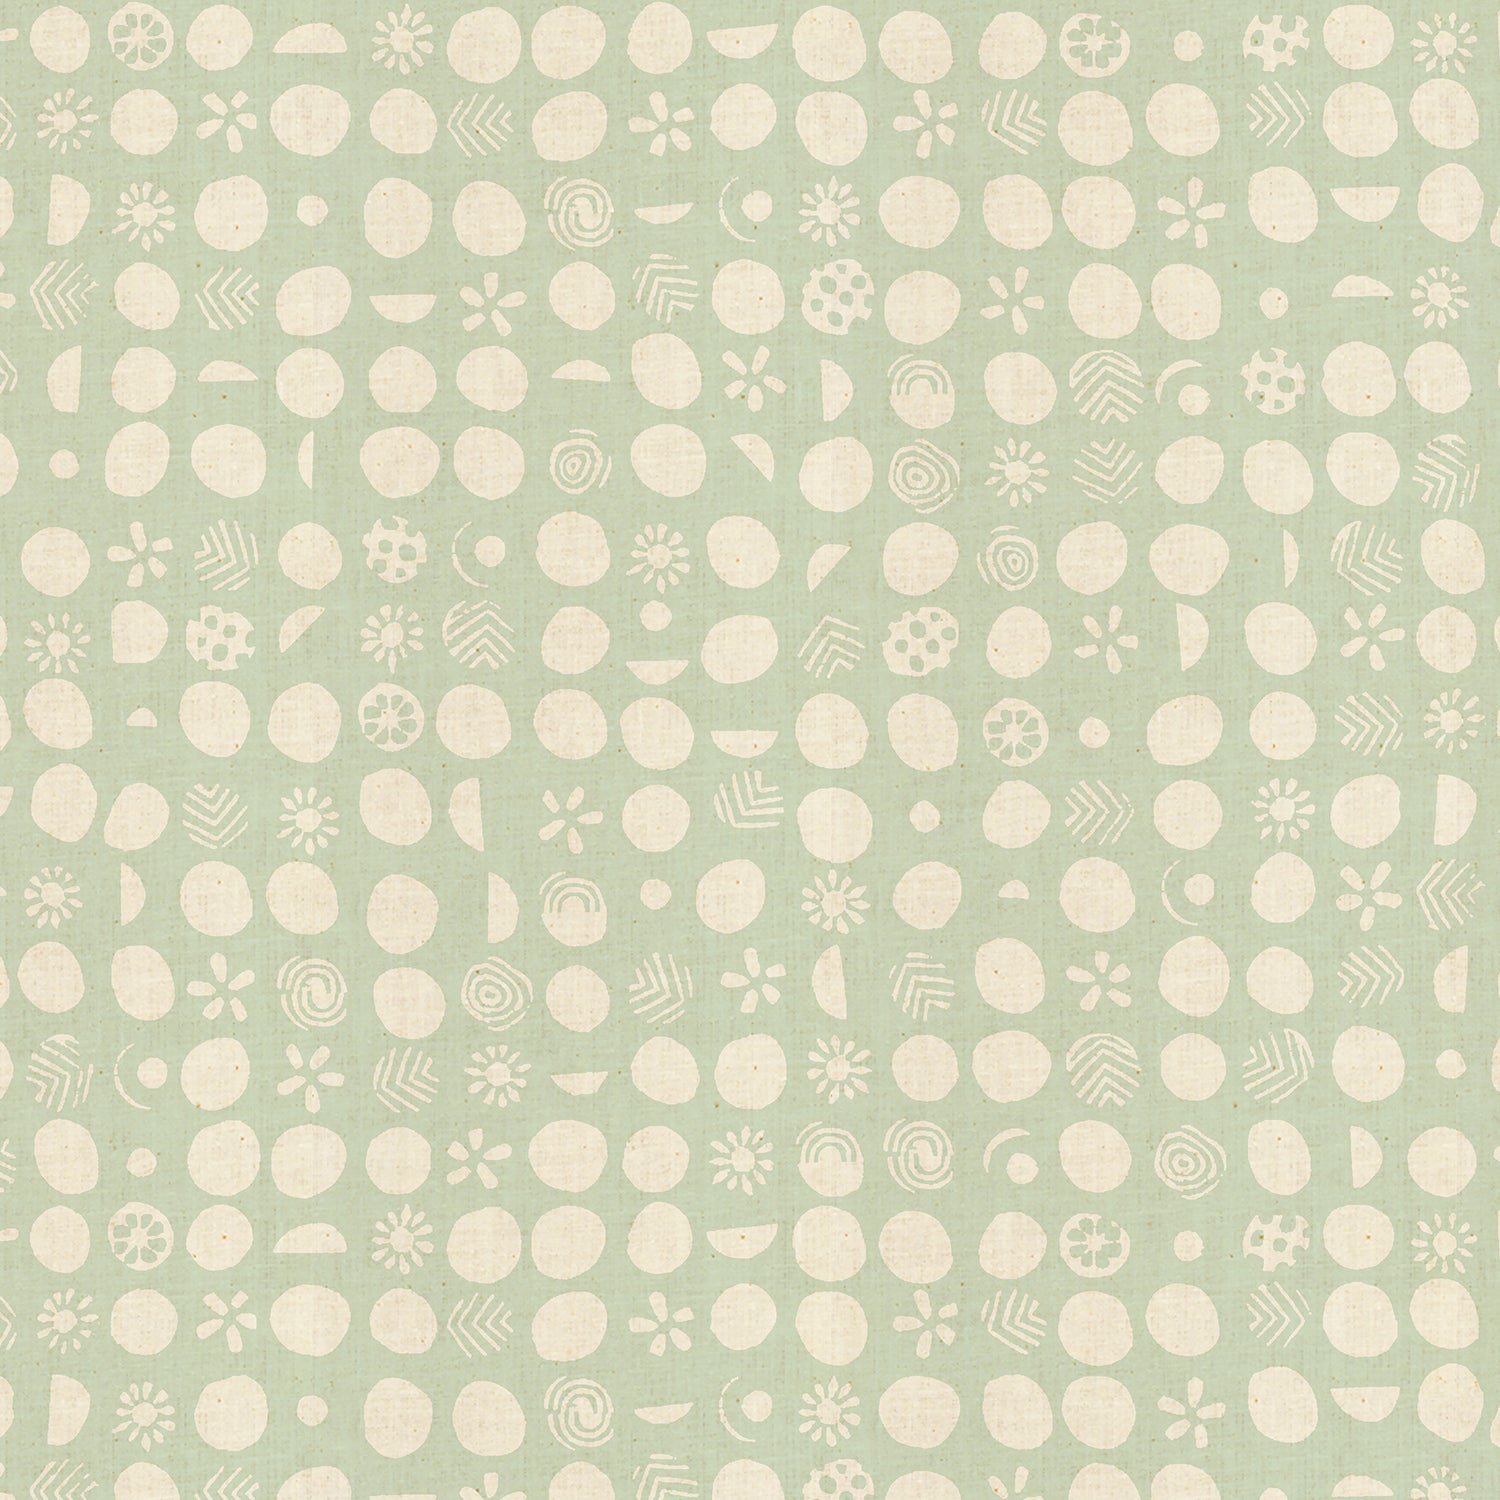 Tidepool / Homestead - Germination in Teal | Unbleached Cotton